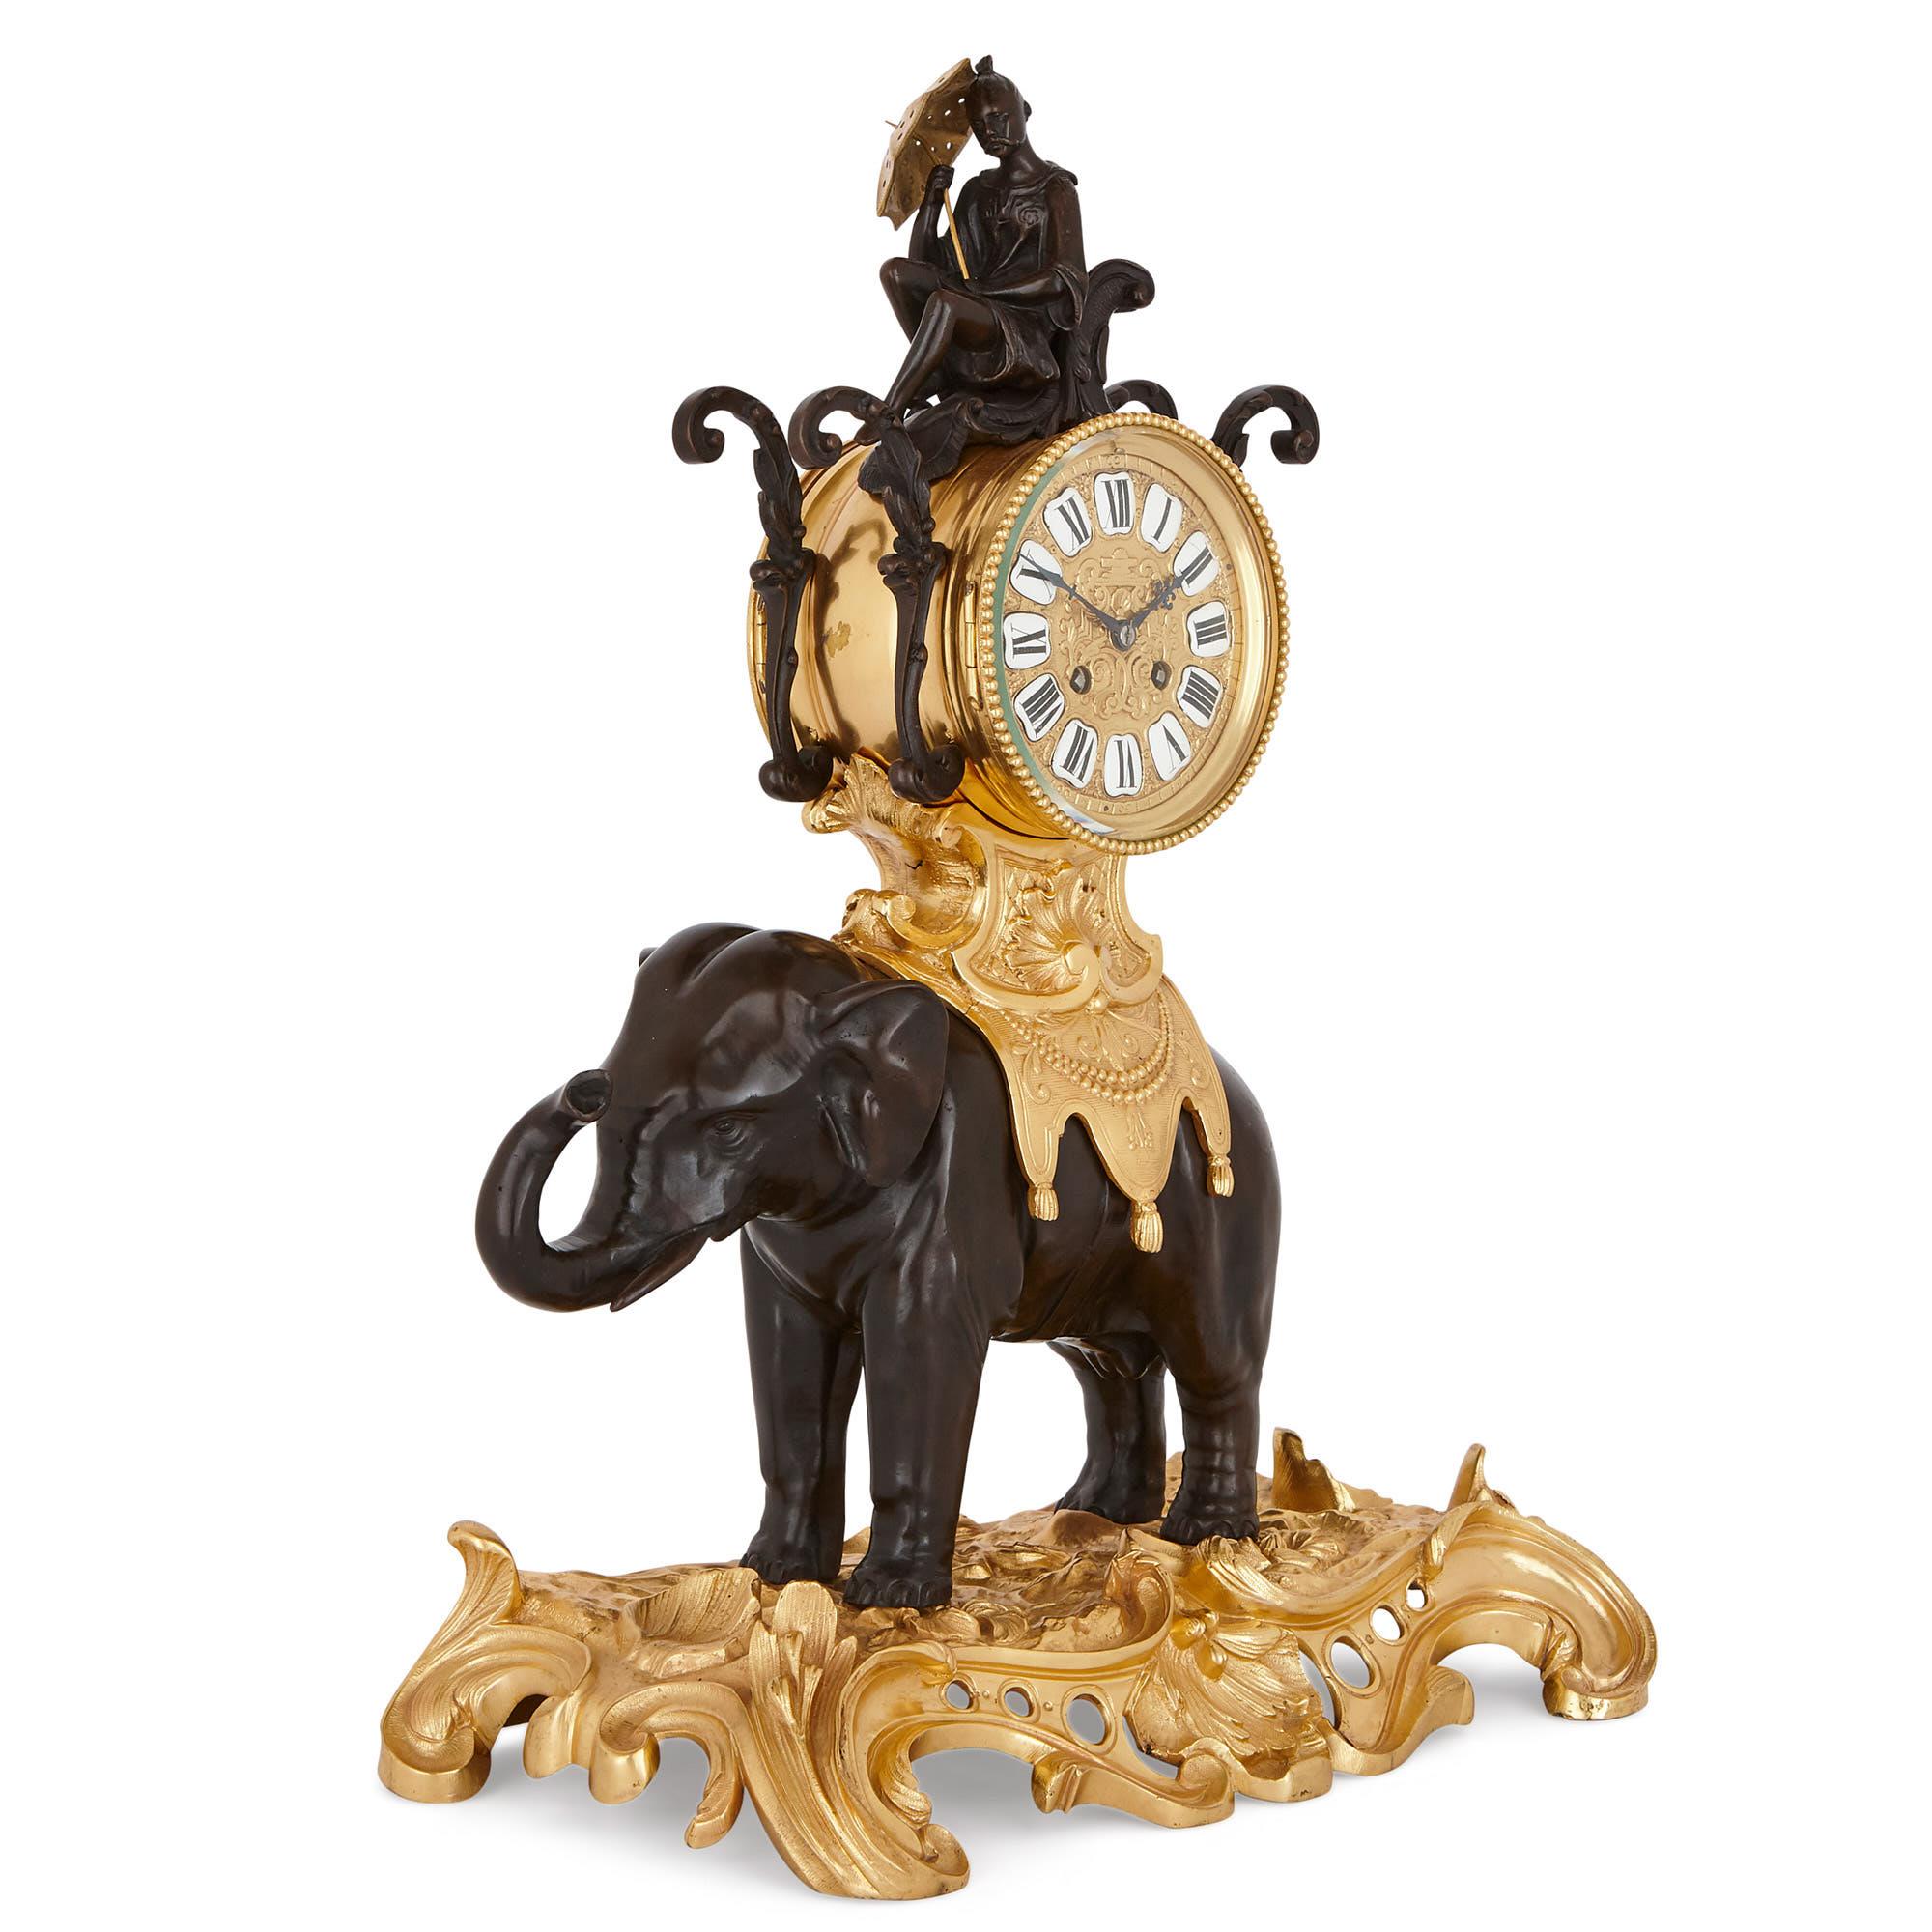 Designed in a fanciful Louis XV style, this beautiful mantel clock takes the form of an Asian elephant, saddled with a howdah (carriage). The clock features a patinated sculpture of a Chinese man, seated on a chair atop a gilt bronze clock dial. The